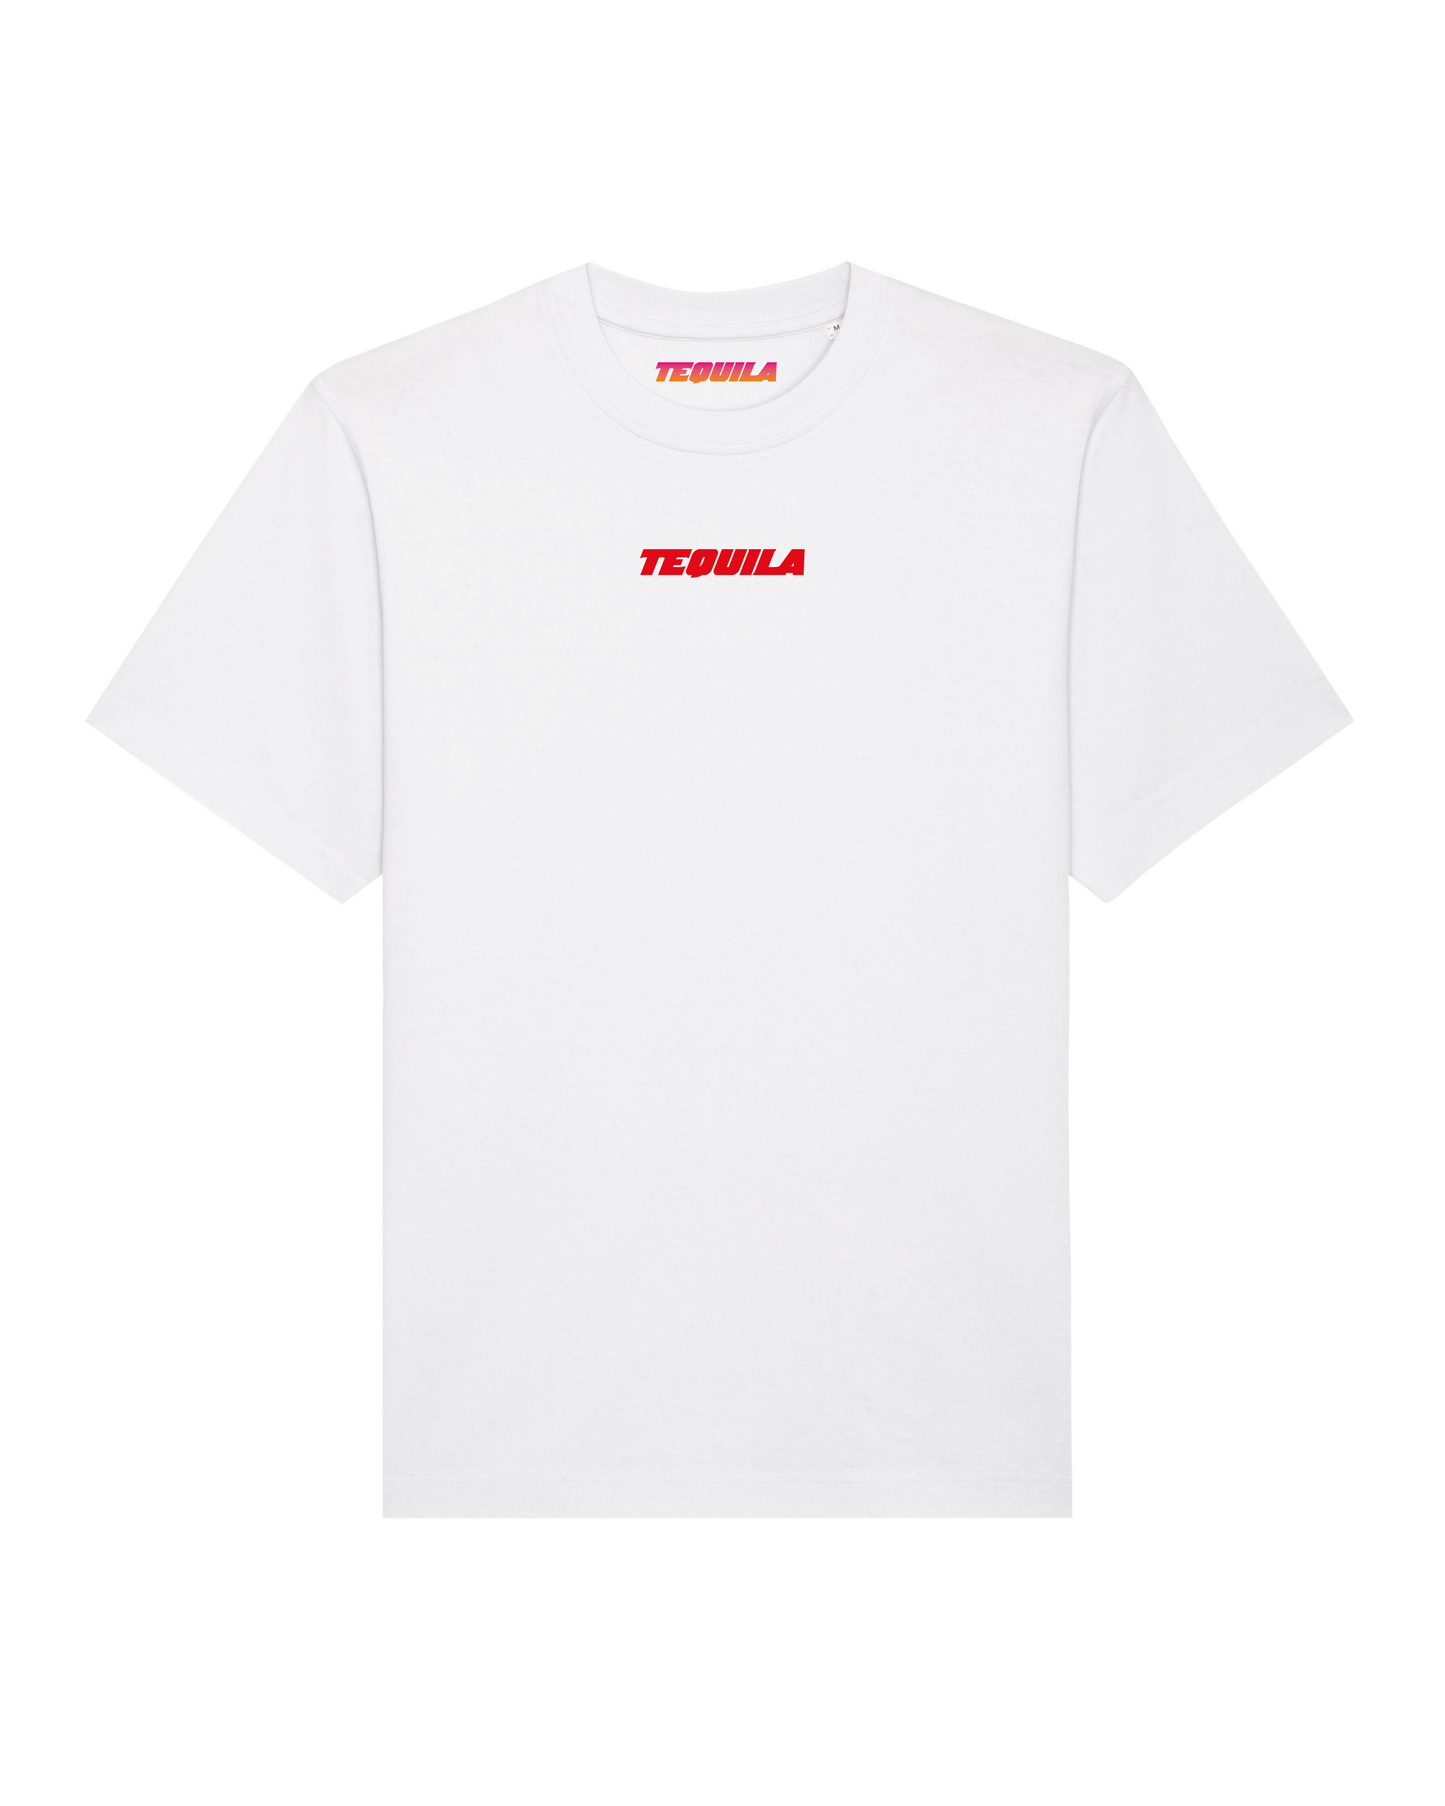 T-shirt Tequila White-Red